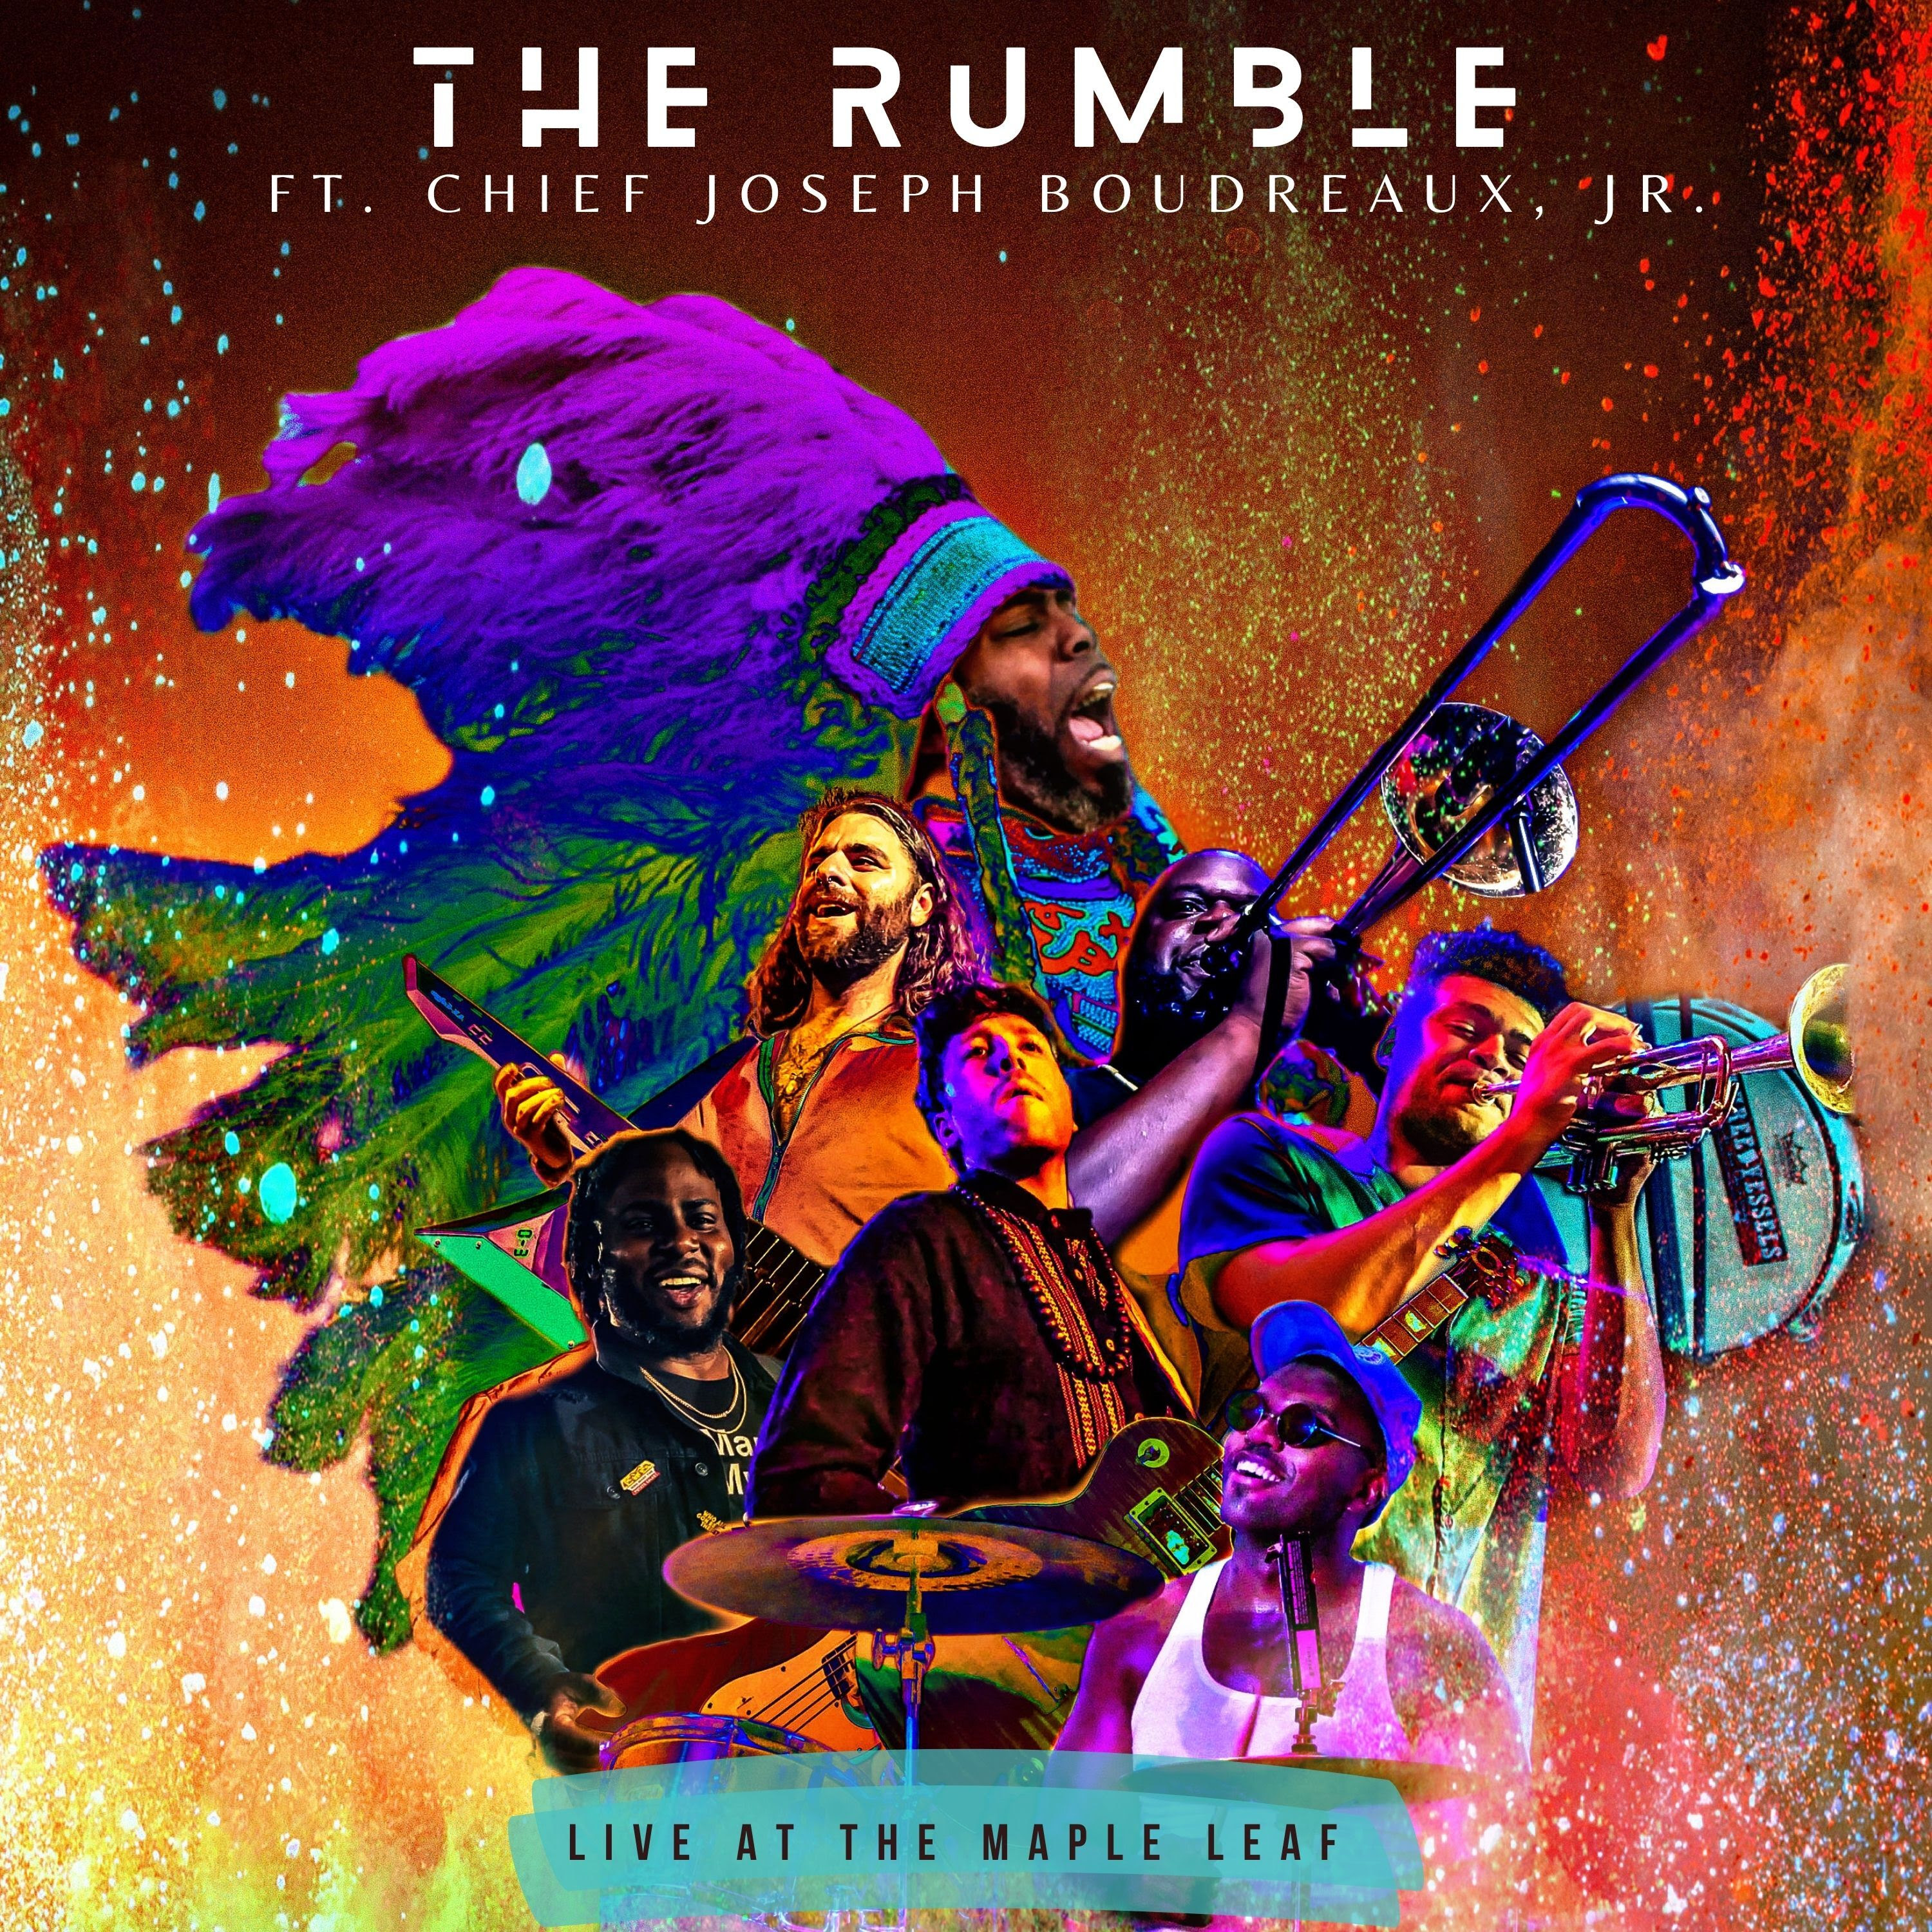 THE RUMBLE FEATURING CHIEF JOSEPH BOUDREAUX JR. TO RELEASE 'LIVE AT THE MAPLE LEAF' MAY 19TH